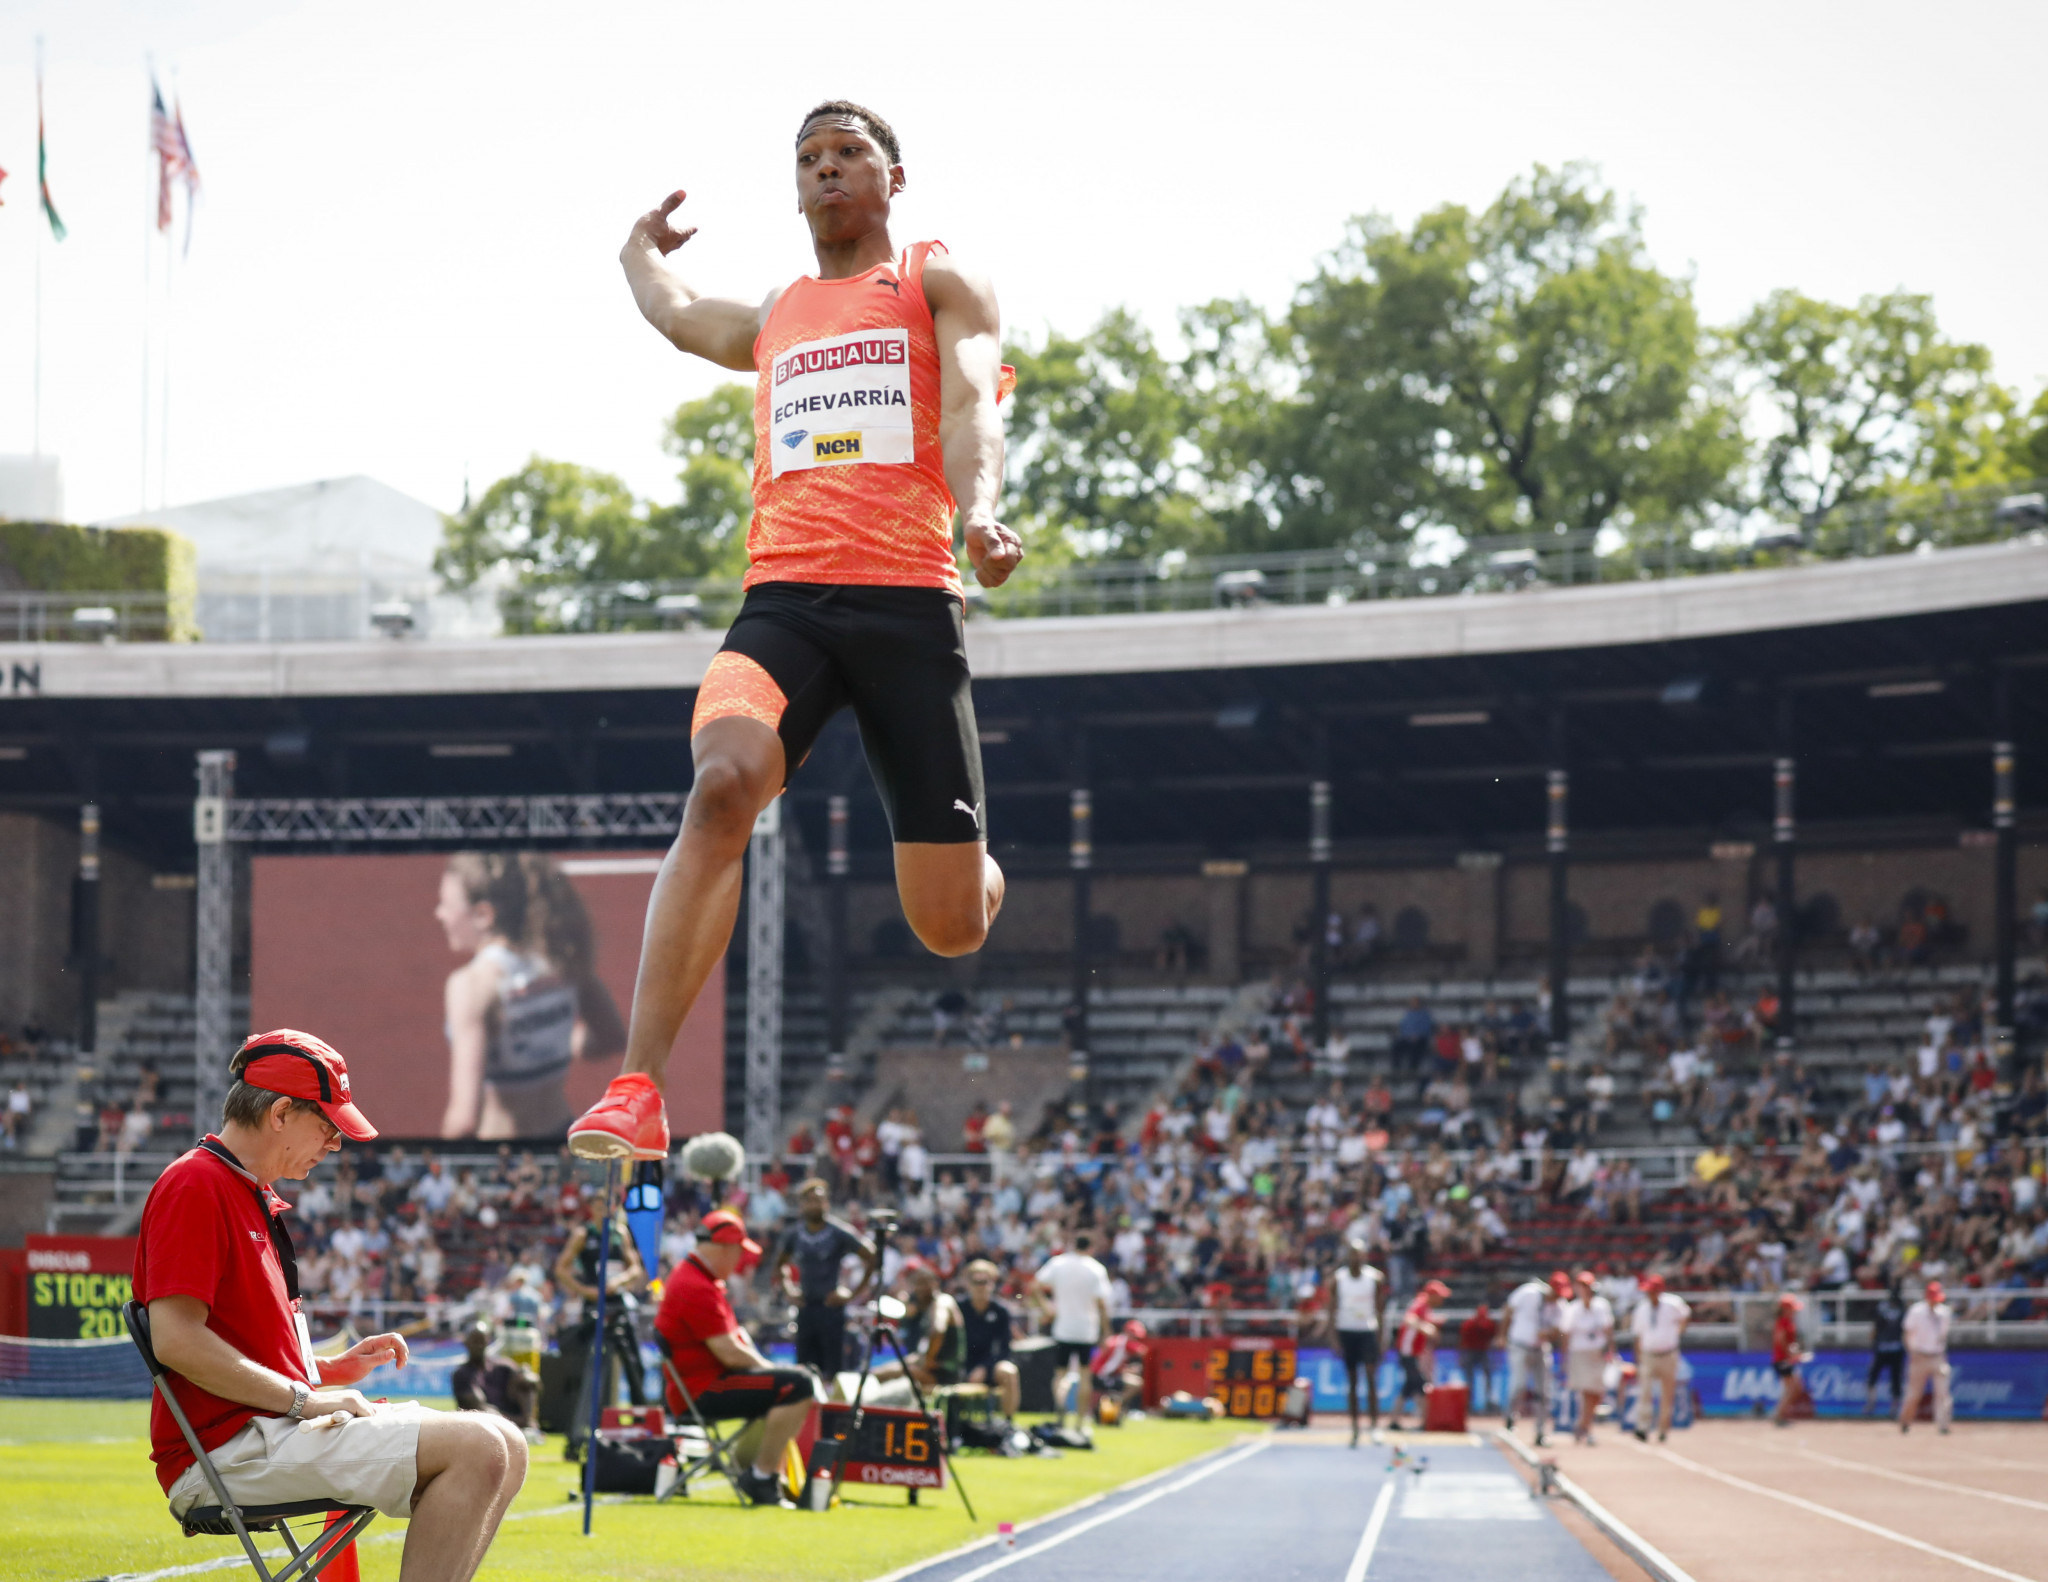 Cuba’s Echevarria takes historic leap as young talents flourish at IAAF Diamond League in Stockholm